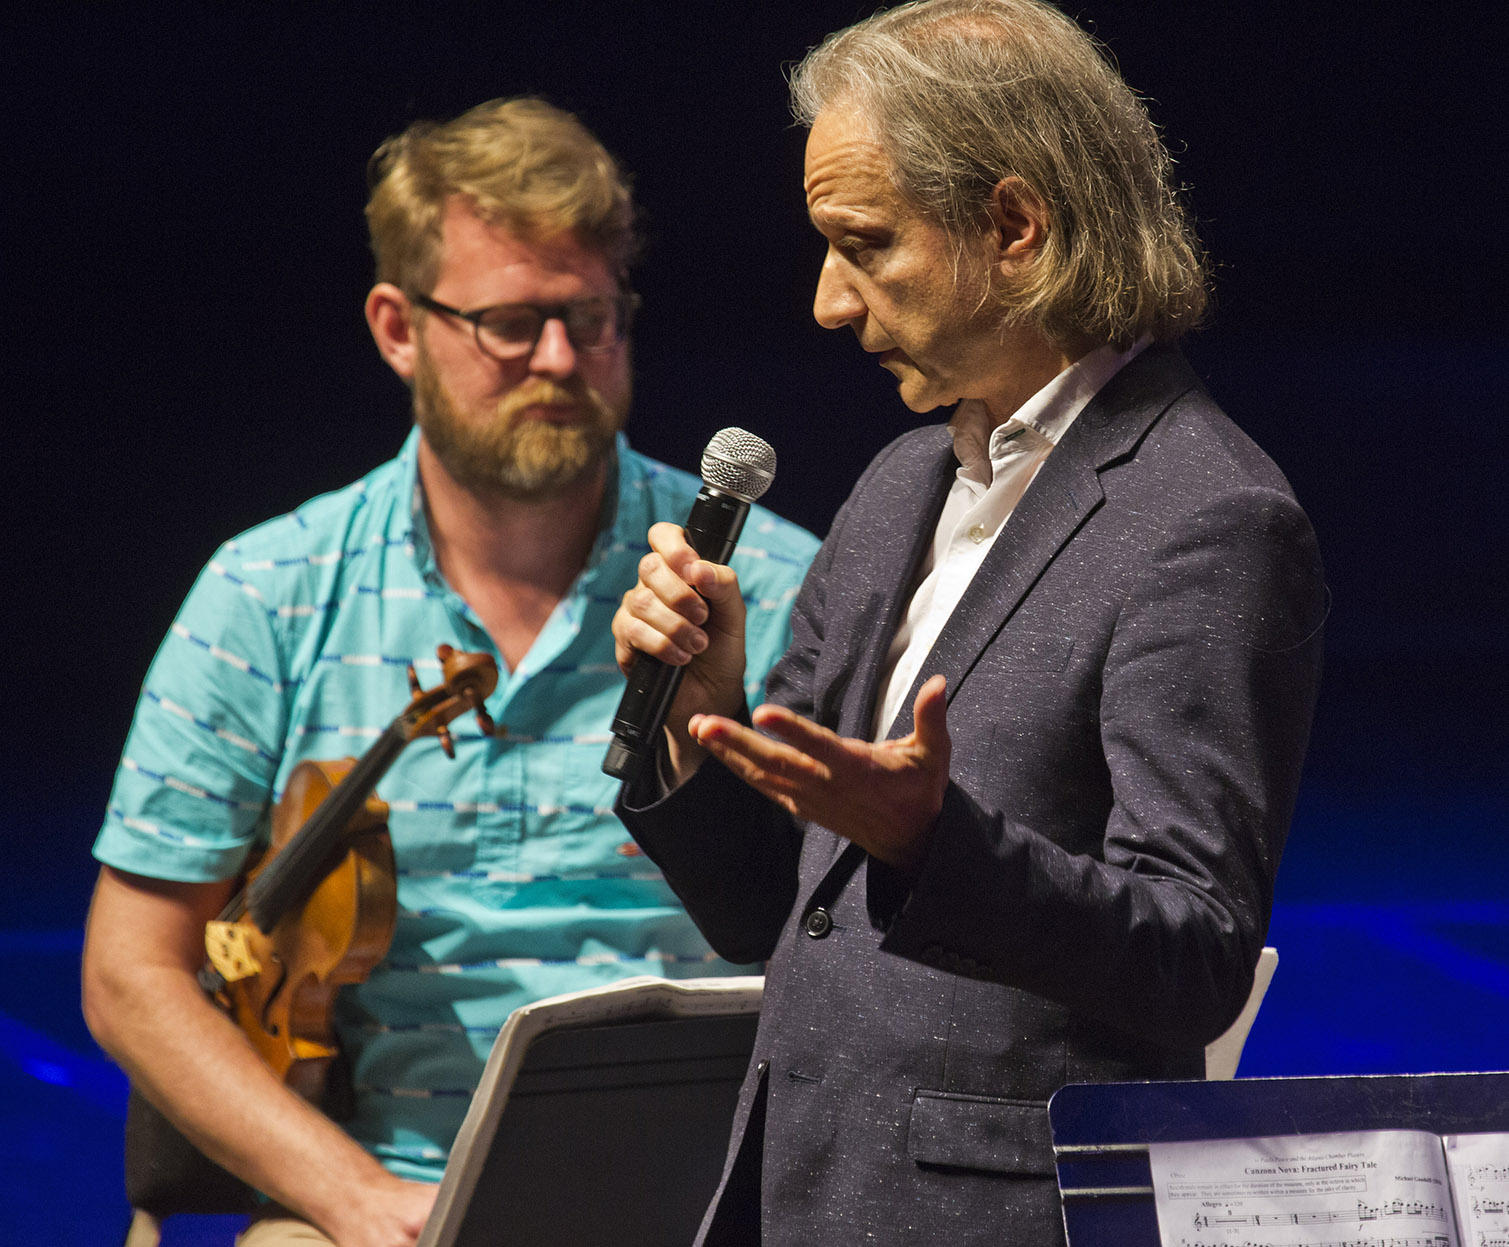 Man speaking into microphone with a violinist in the background